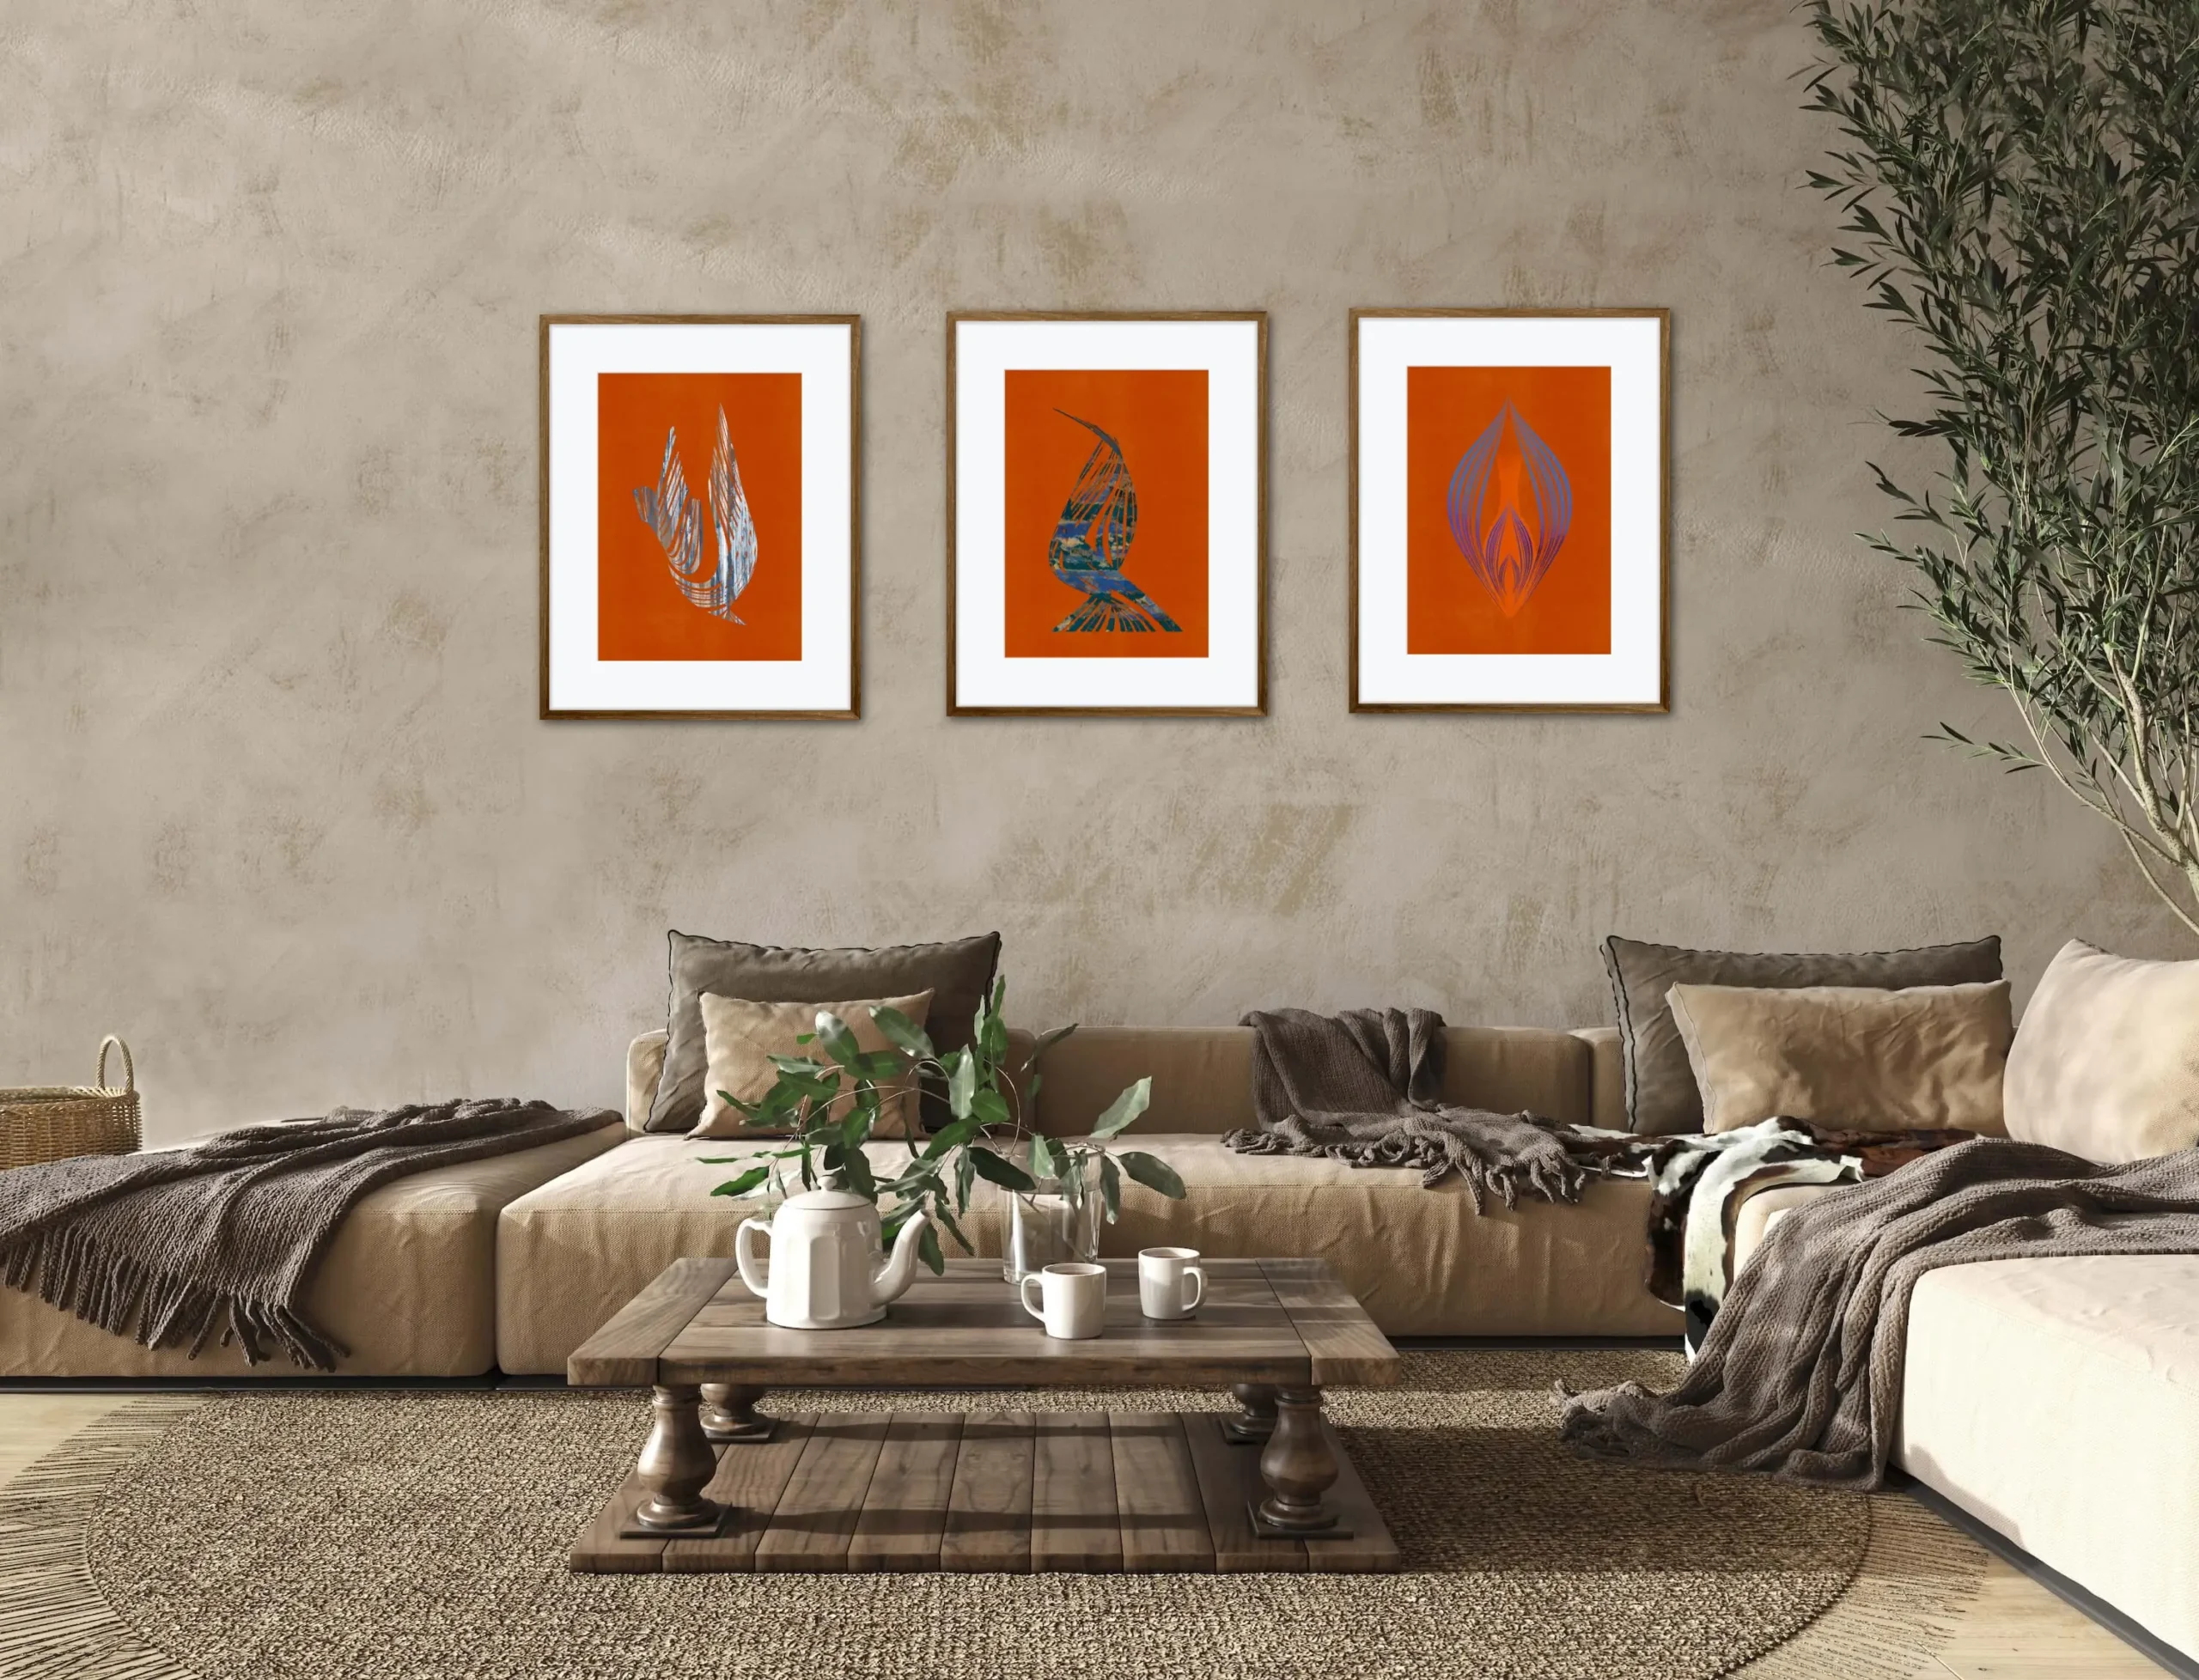 Set of 3 Original Art Prints in terracotta and blue by Inta Leora